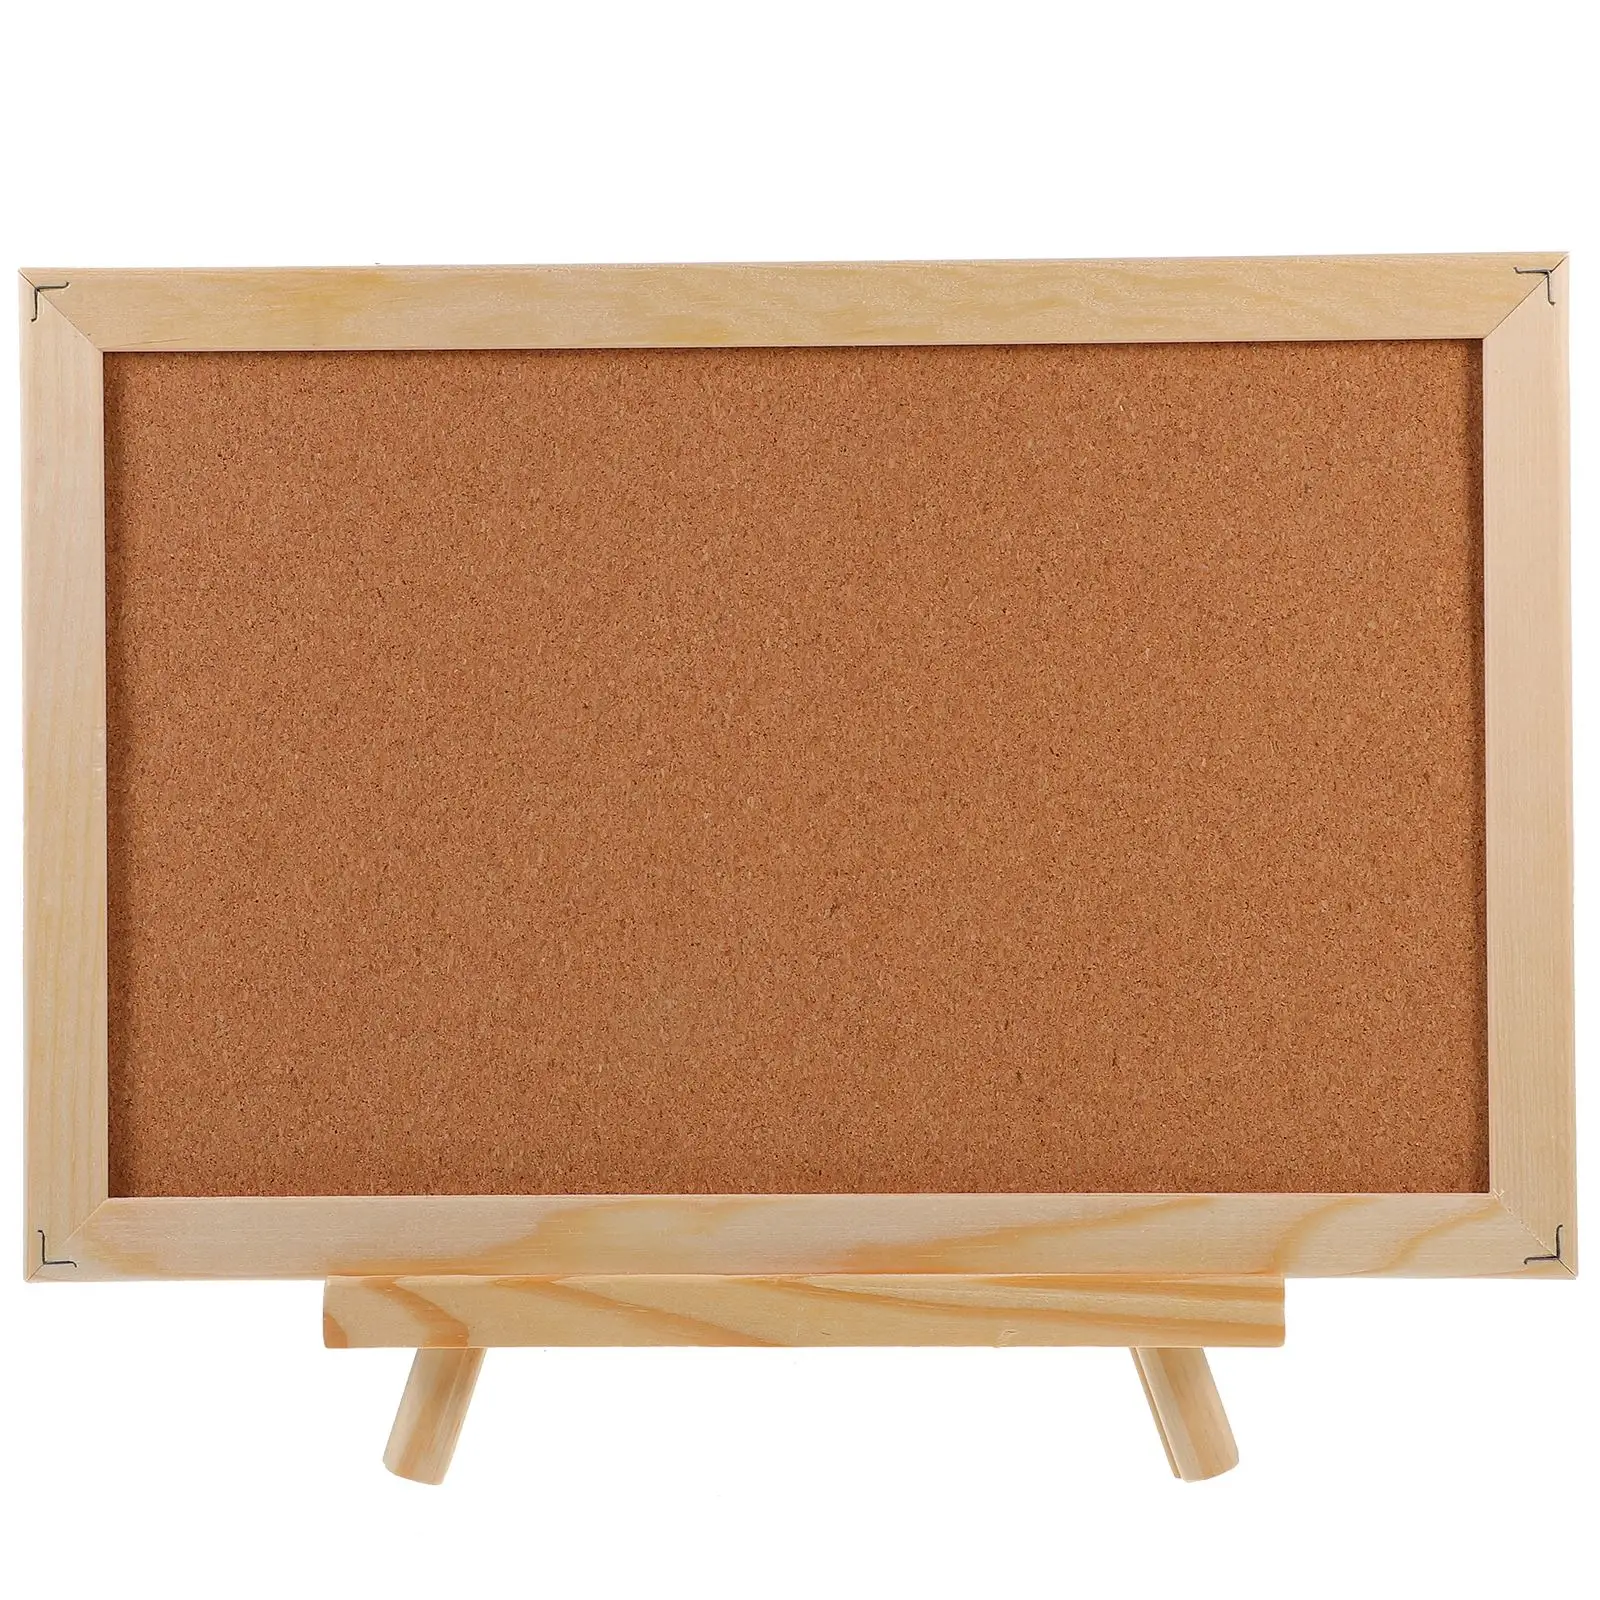 Durable Cork Wood Wall Hanging Message Bulletin Board Frame Notice Note Memo Board For Home Office Shop School Photo Background cork bulletin board wood framed corkboard notice whiteboard hanging pin board message board for home office school decor 30x40cm